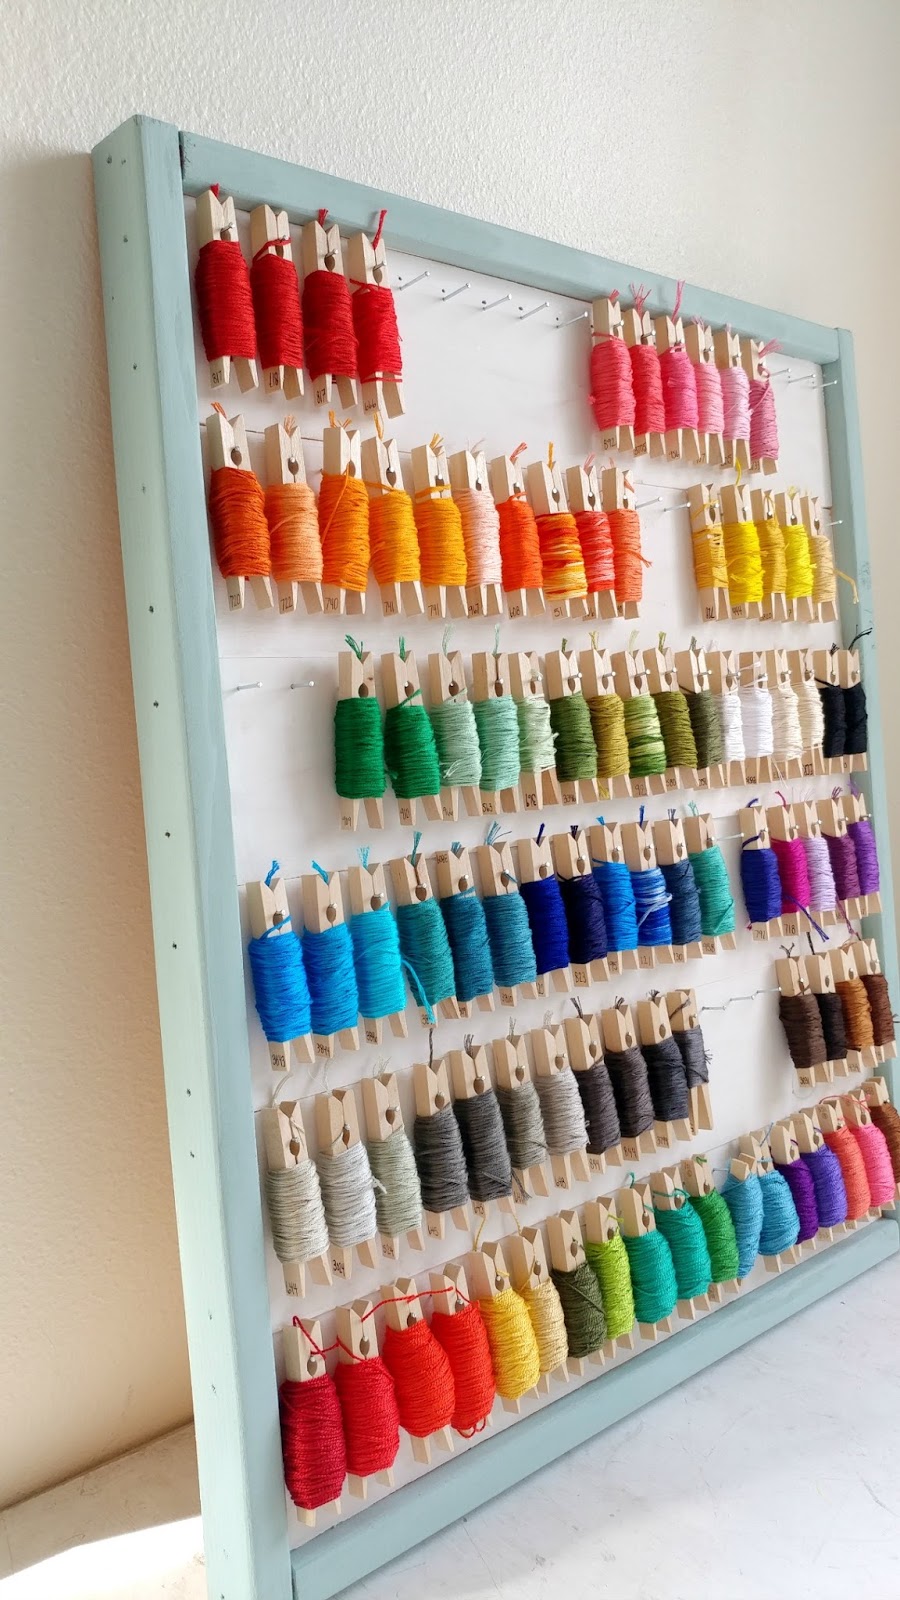 DIY Embroidery Floss Organizer using Clothespins - Ameroonie Designs